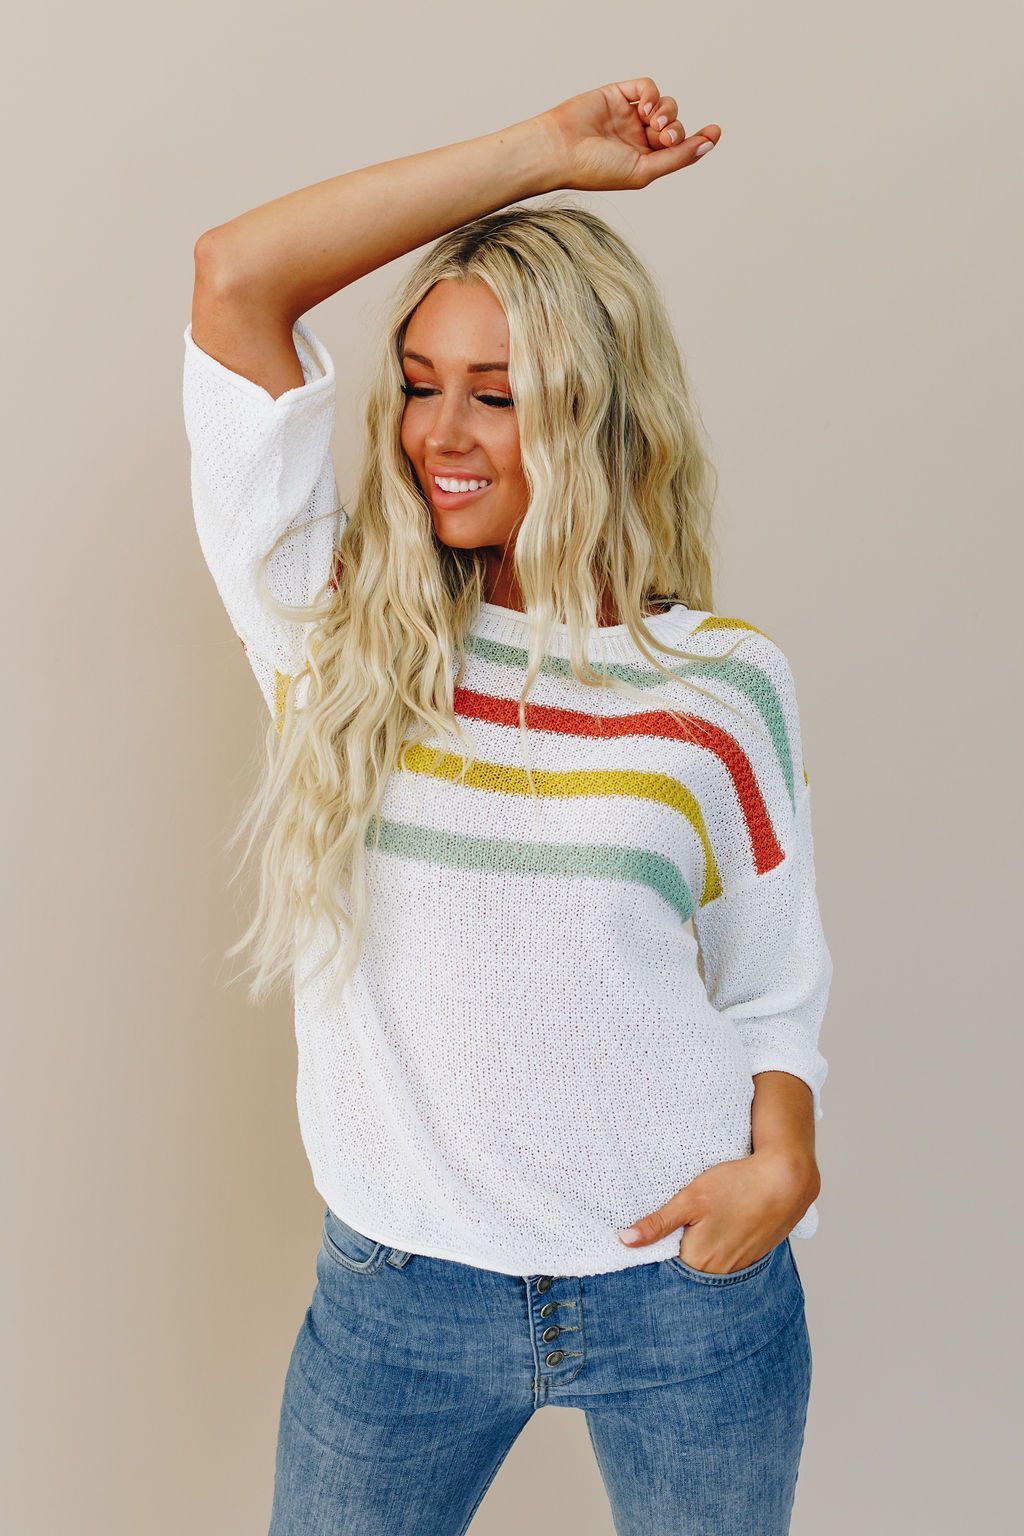 Stripes For Days Lightweight Sweater